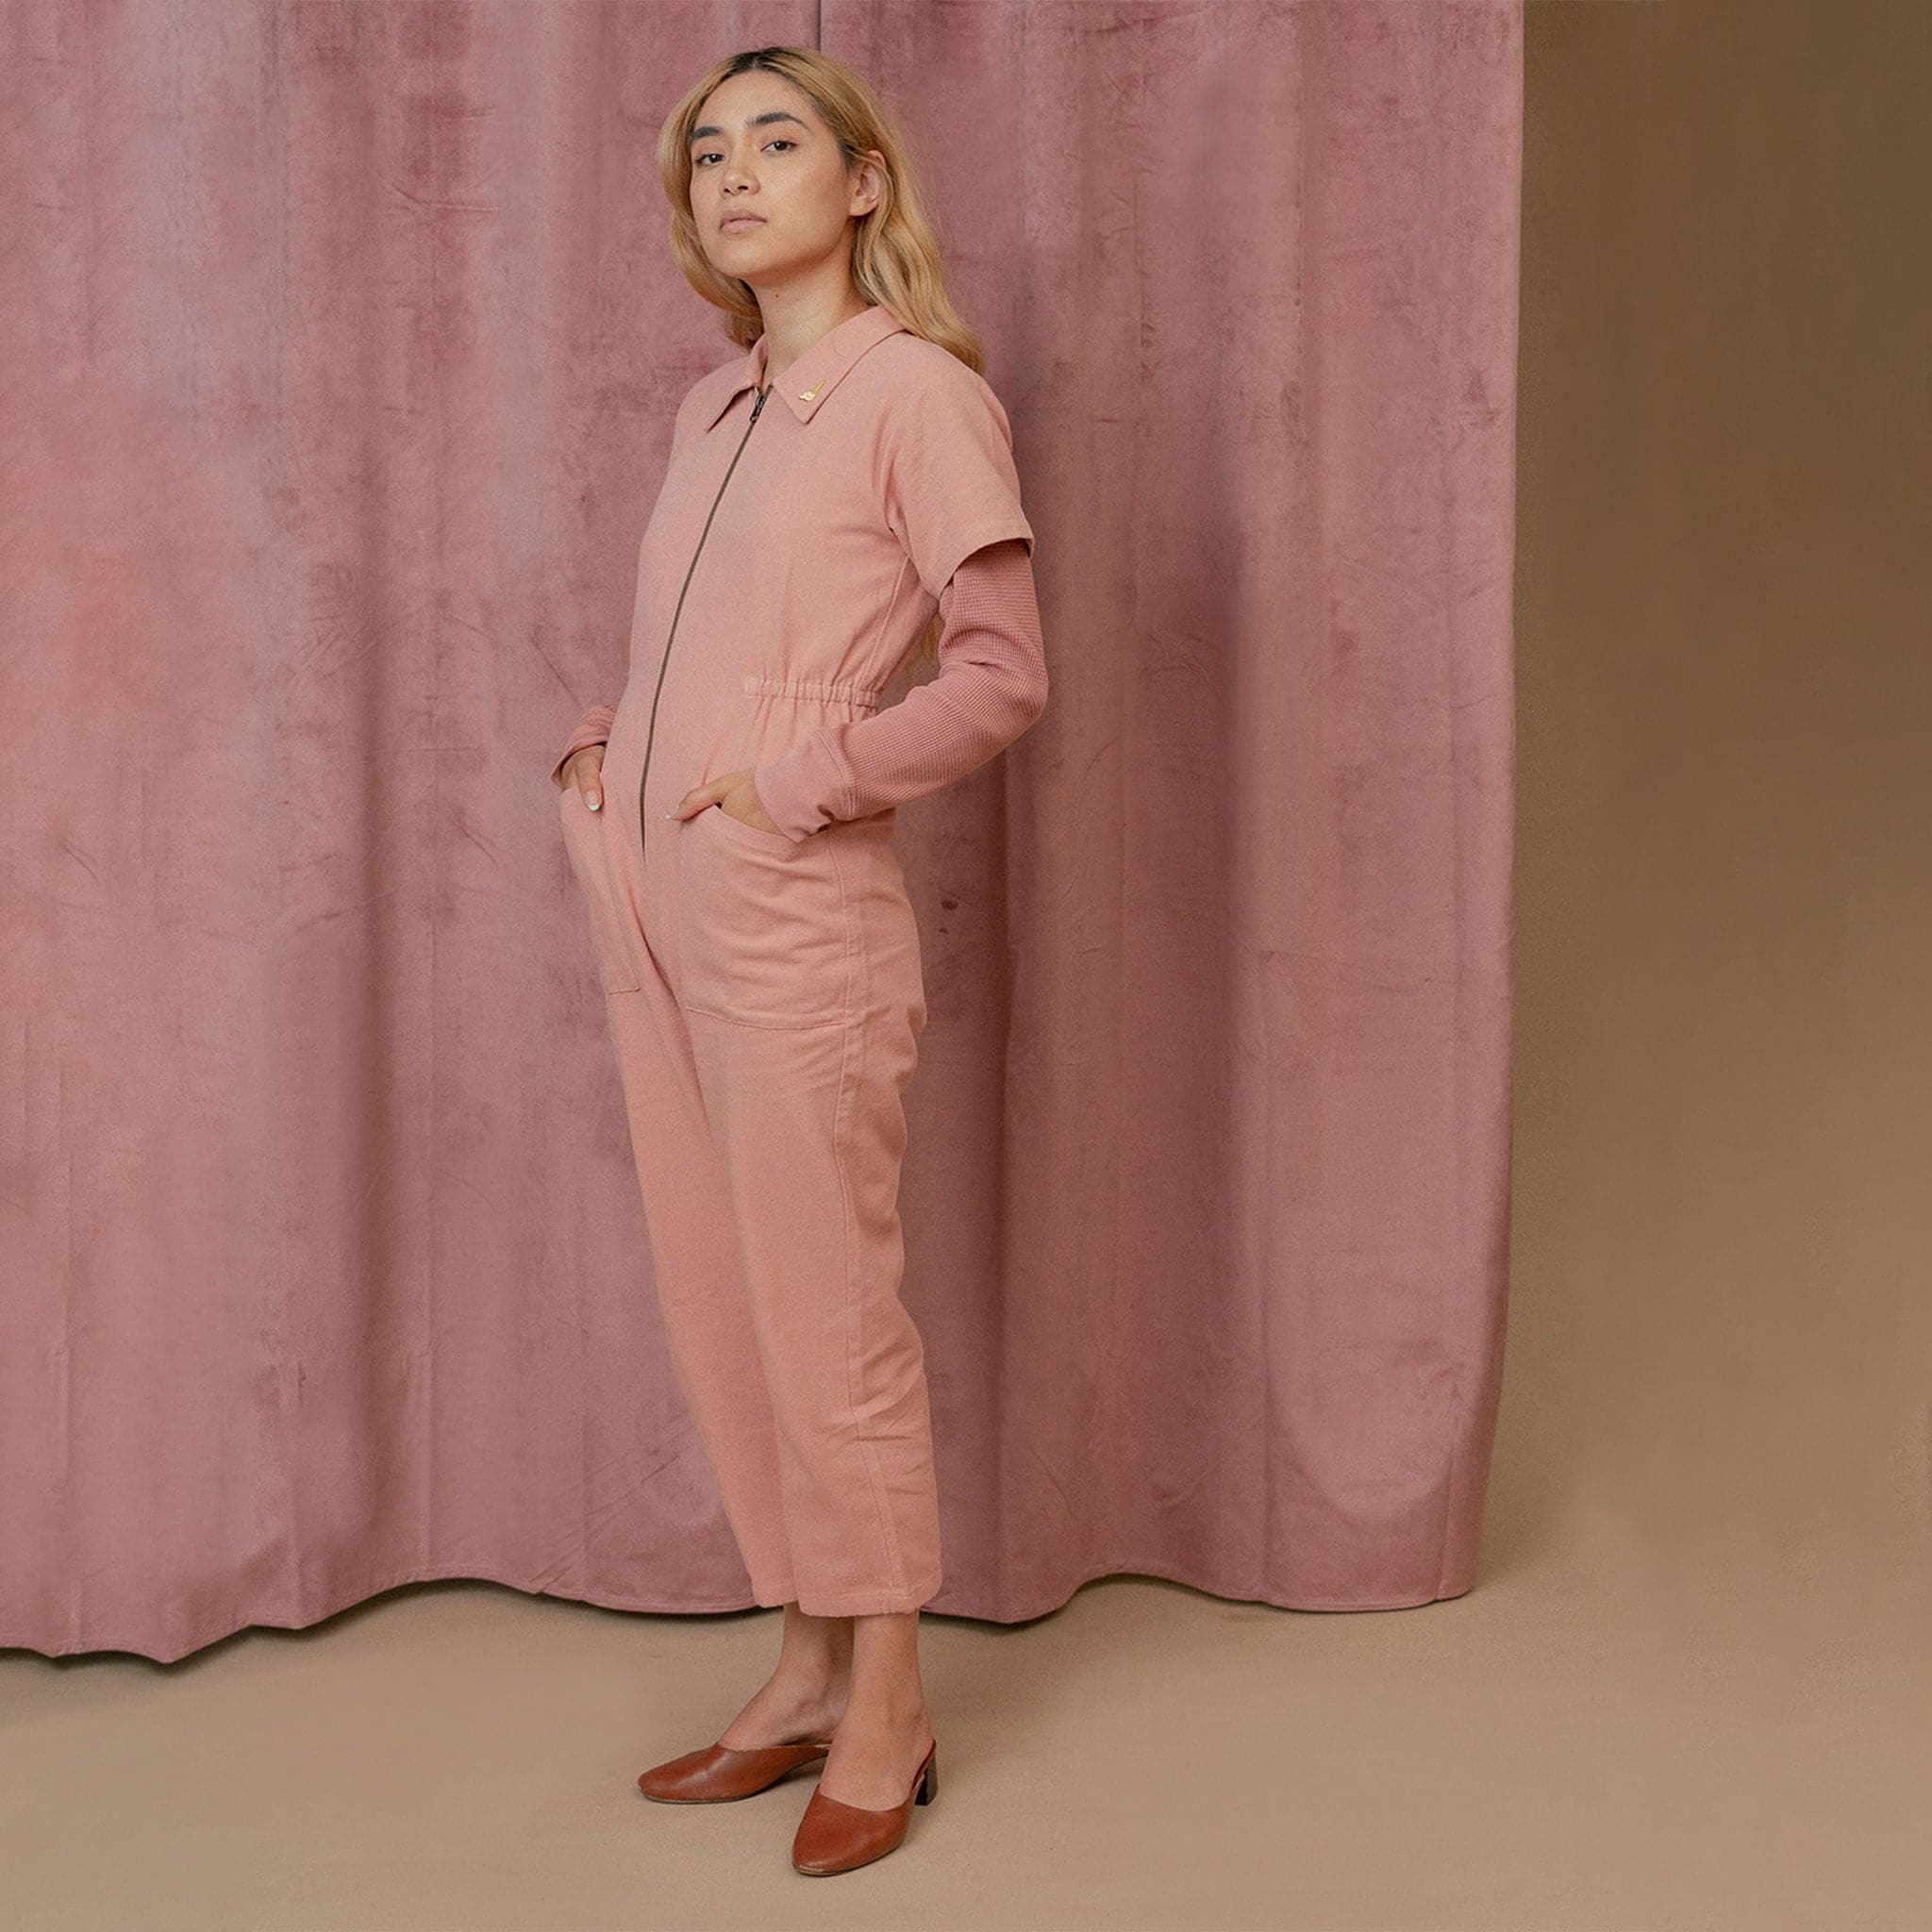 A short sleeved utility jumpsuit in the sweetest dusty rose shade. There is a front zipper and a two pockets.